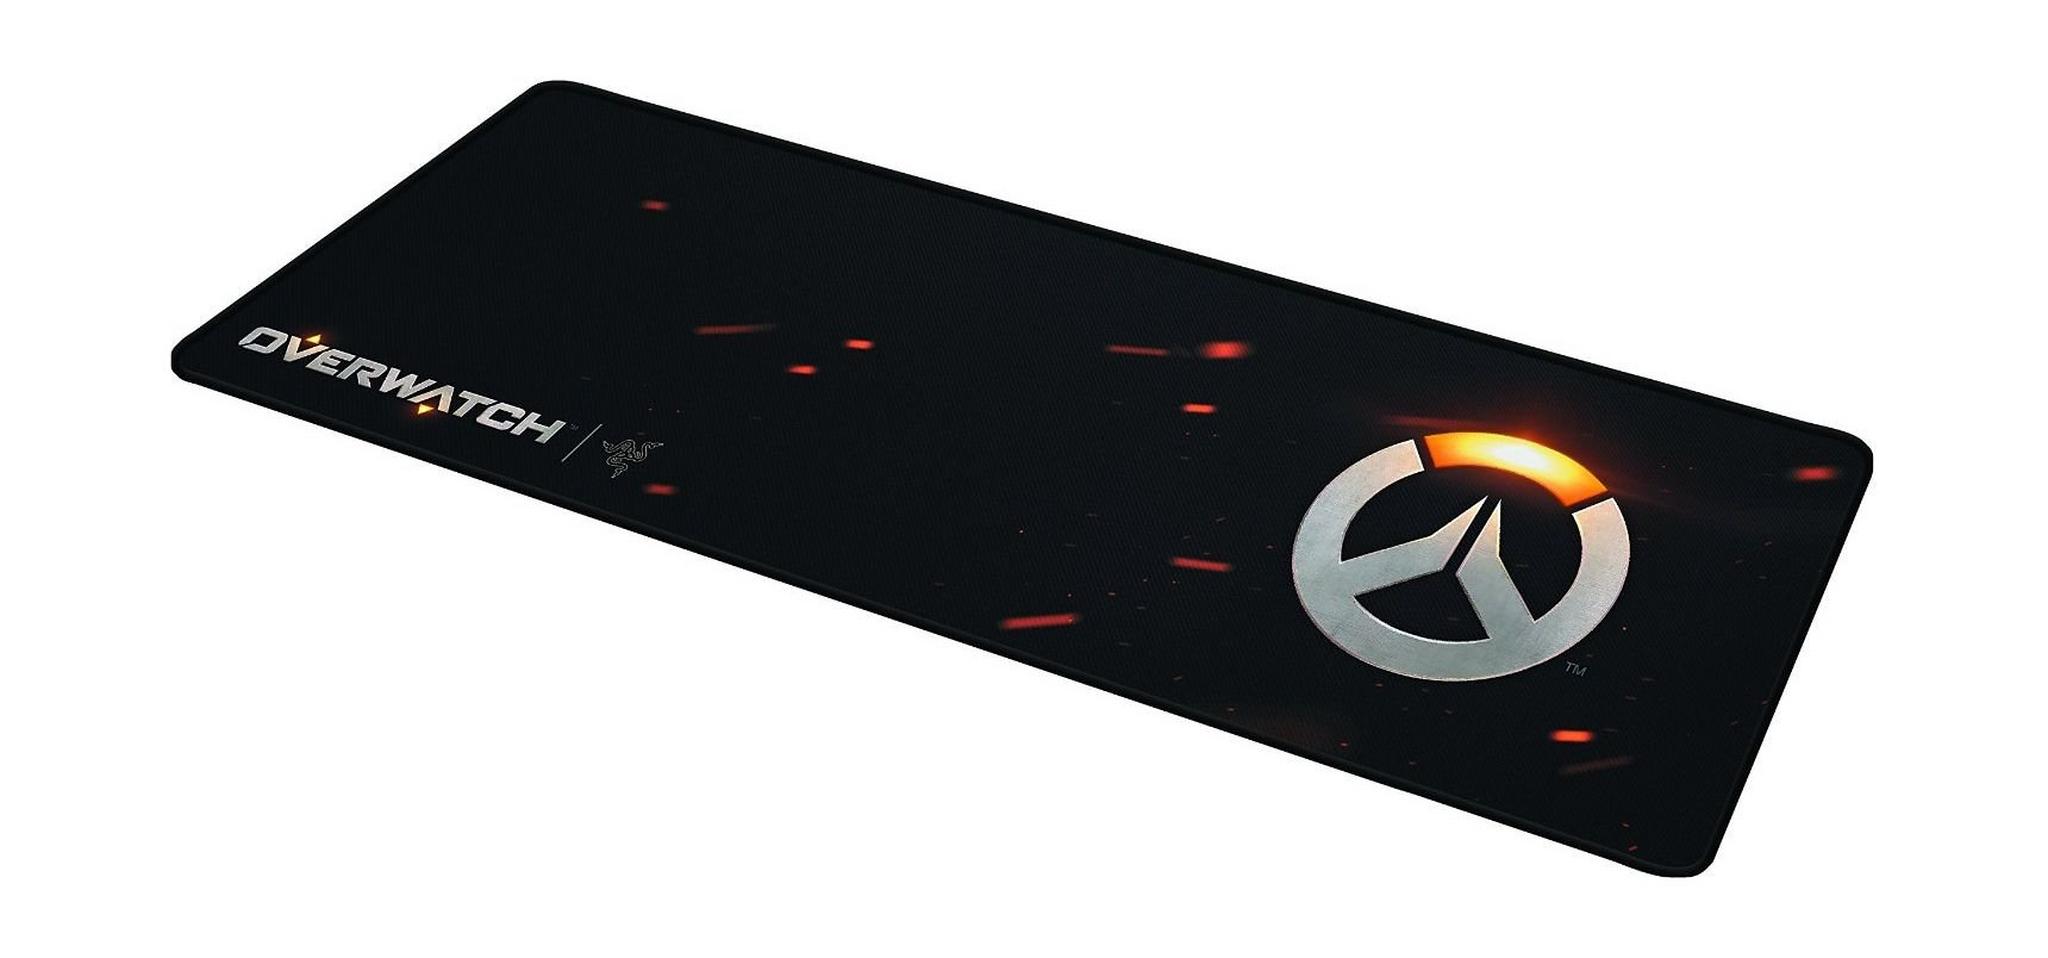 Razer Overwatch Goliathus Extended Speed Gaming Mouse Pad